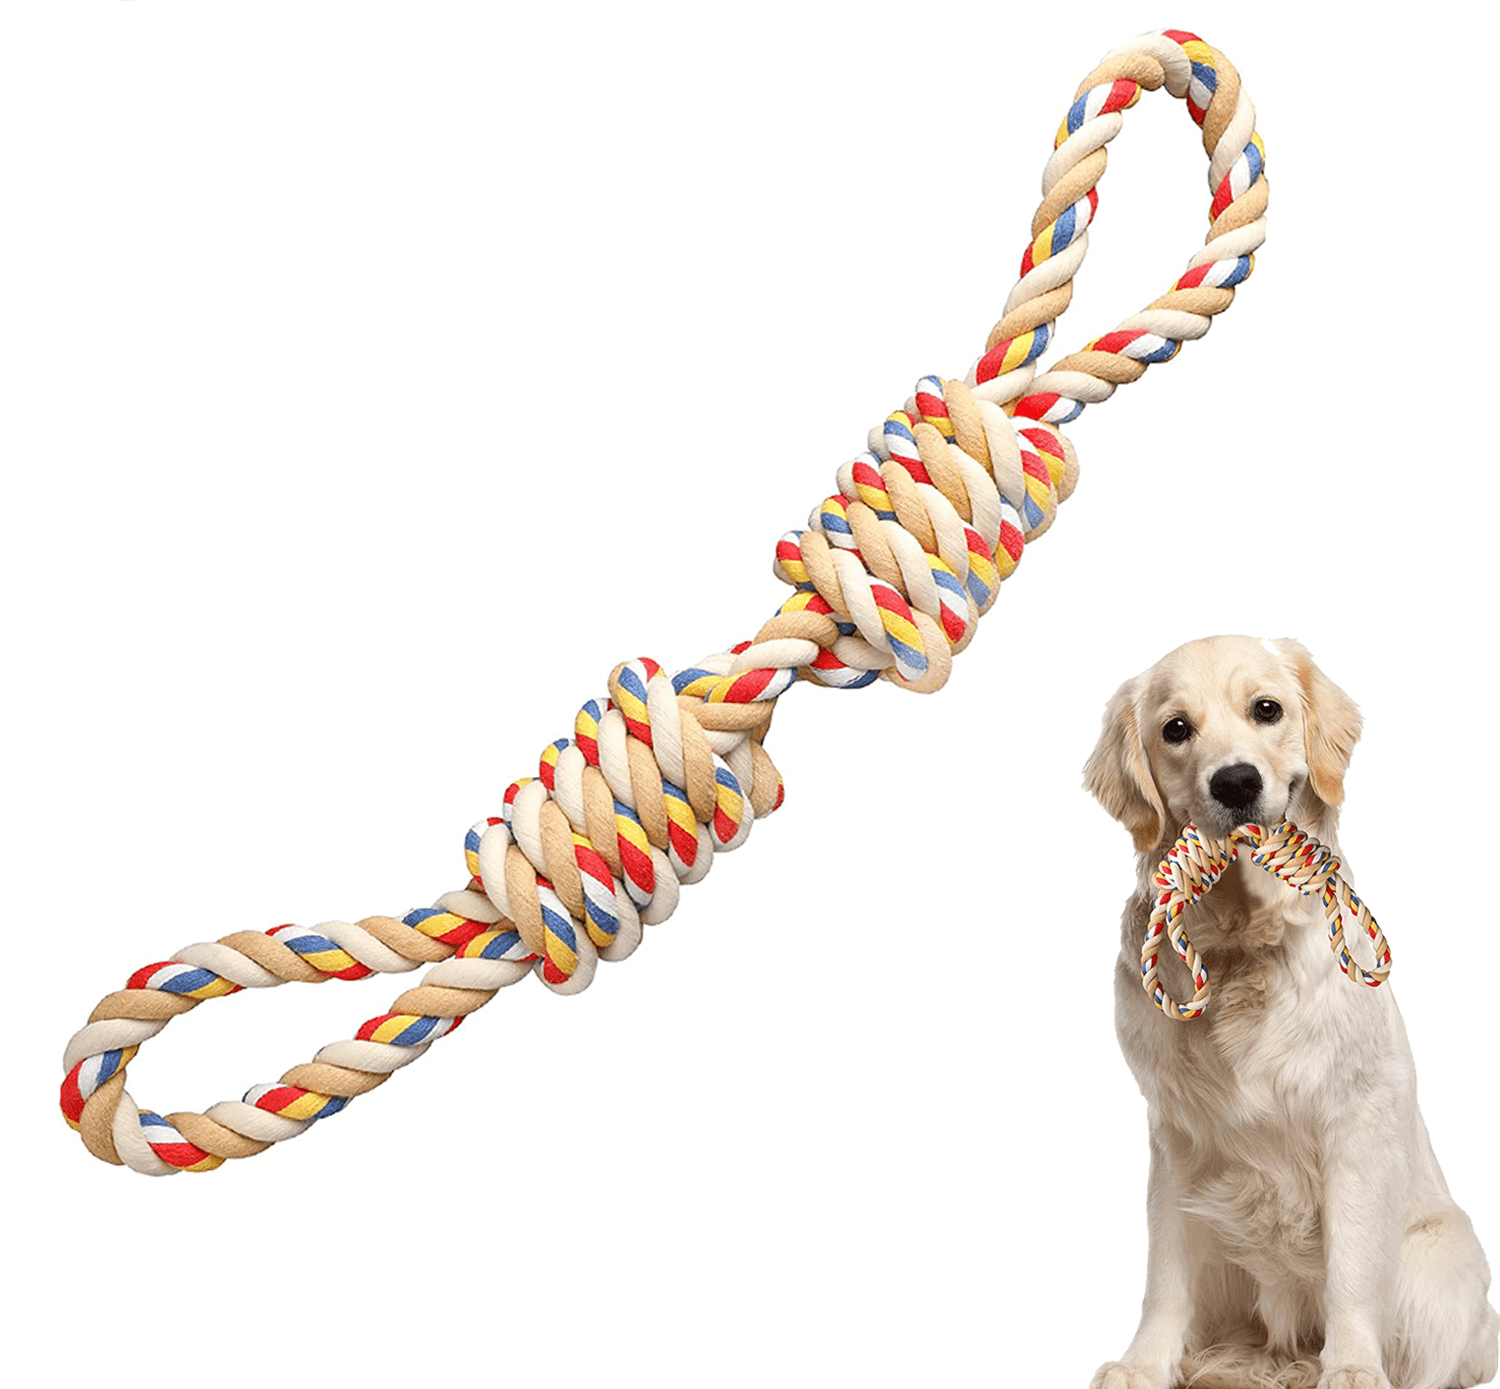 Rope Tug of War Toys Nearly Indestructible Chew Toys Set Jmxus Dog Rope Toys for Aggressive Chewers Tough Rope Toy Assortment with Storage Bag for Medium and Large Dogs 6 Pack 